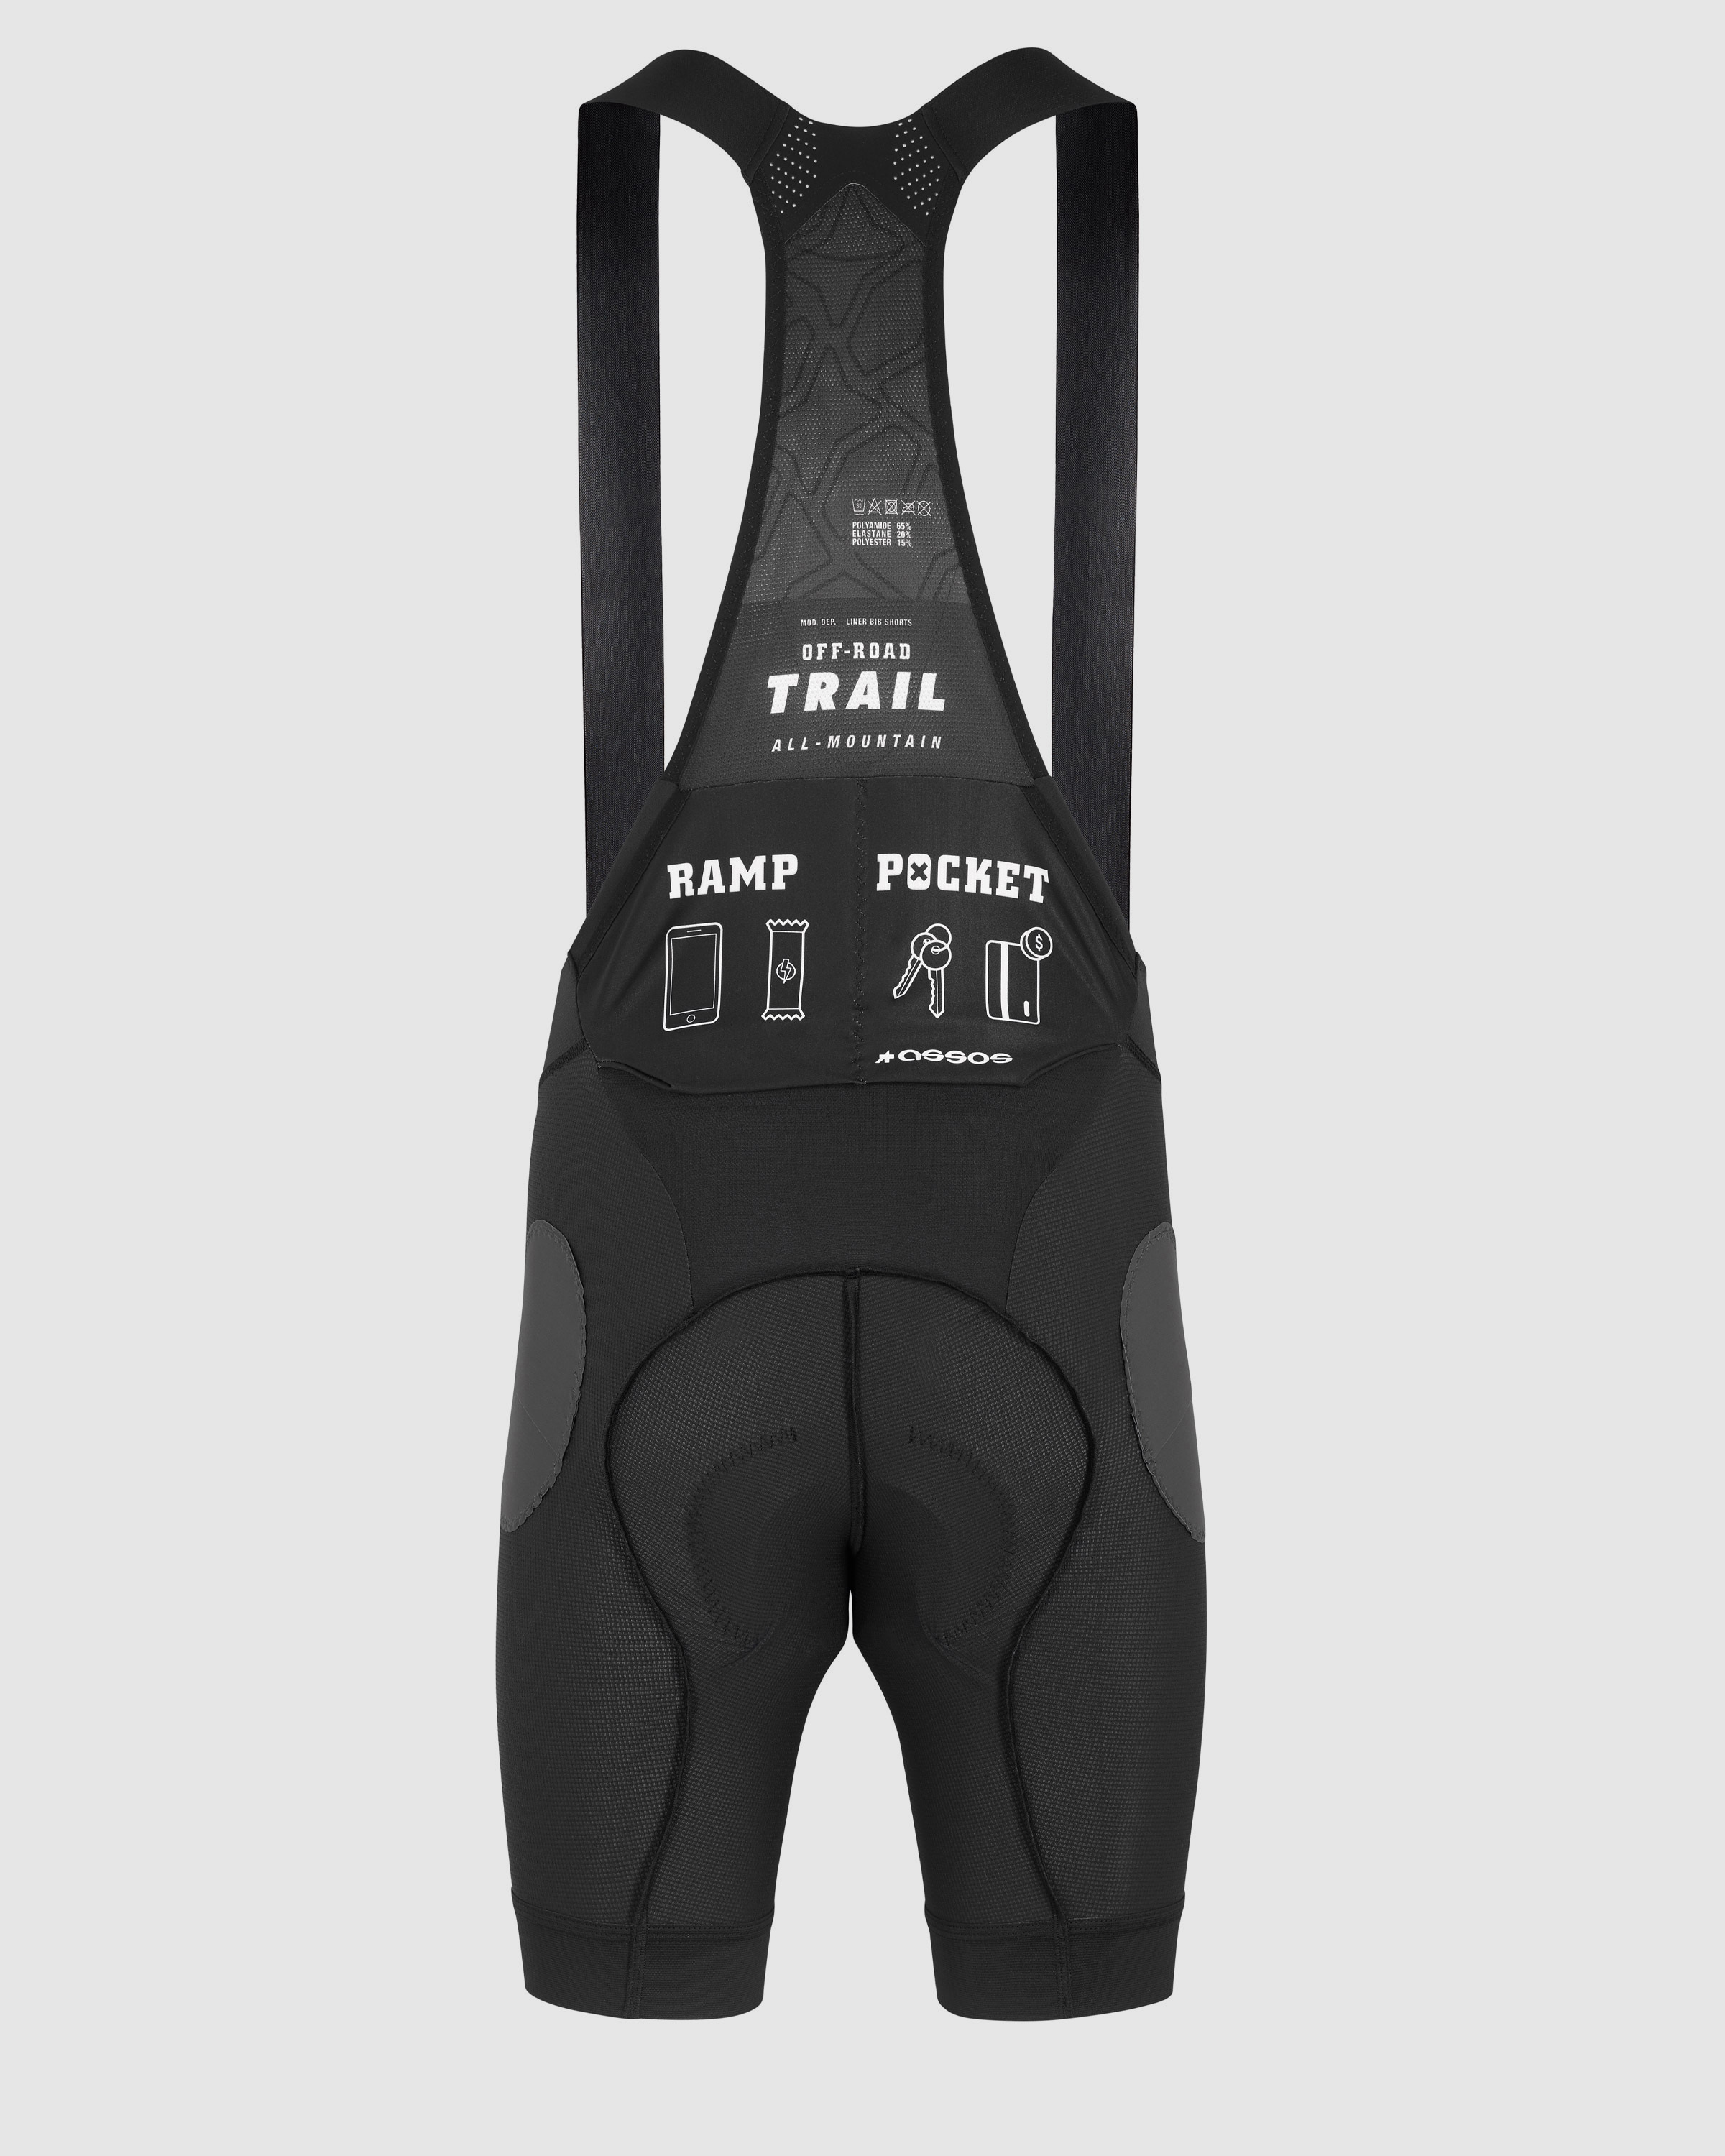 TRAIL Liner Bib Shorts - ASSOS Of Switzerland - Official Outlet